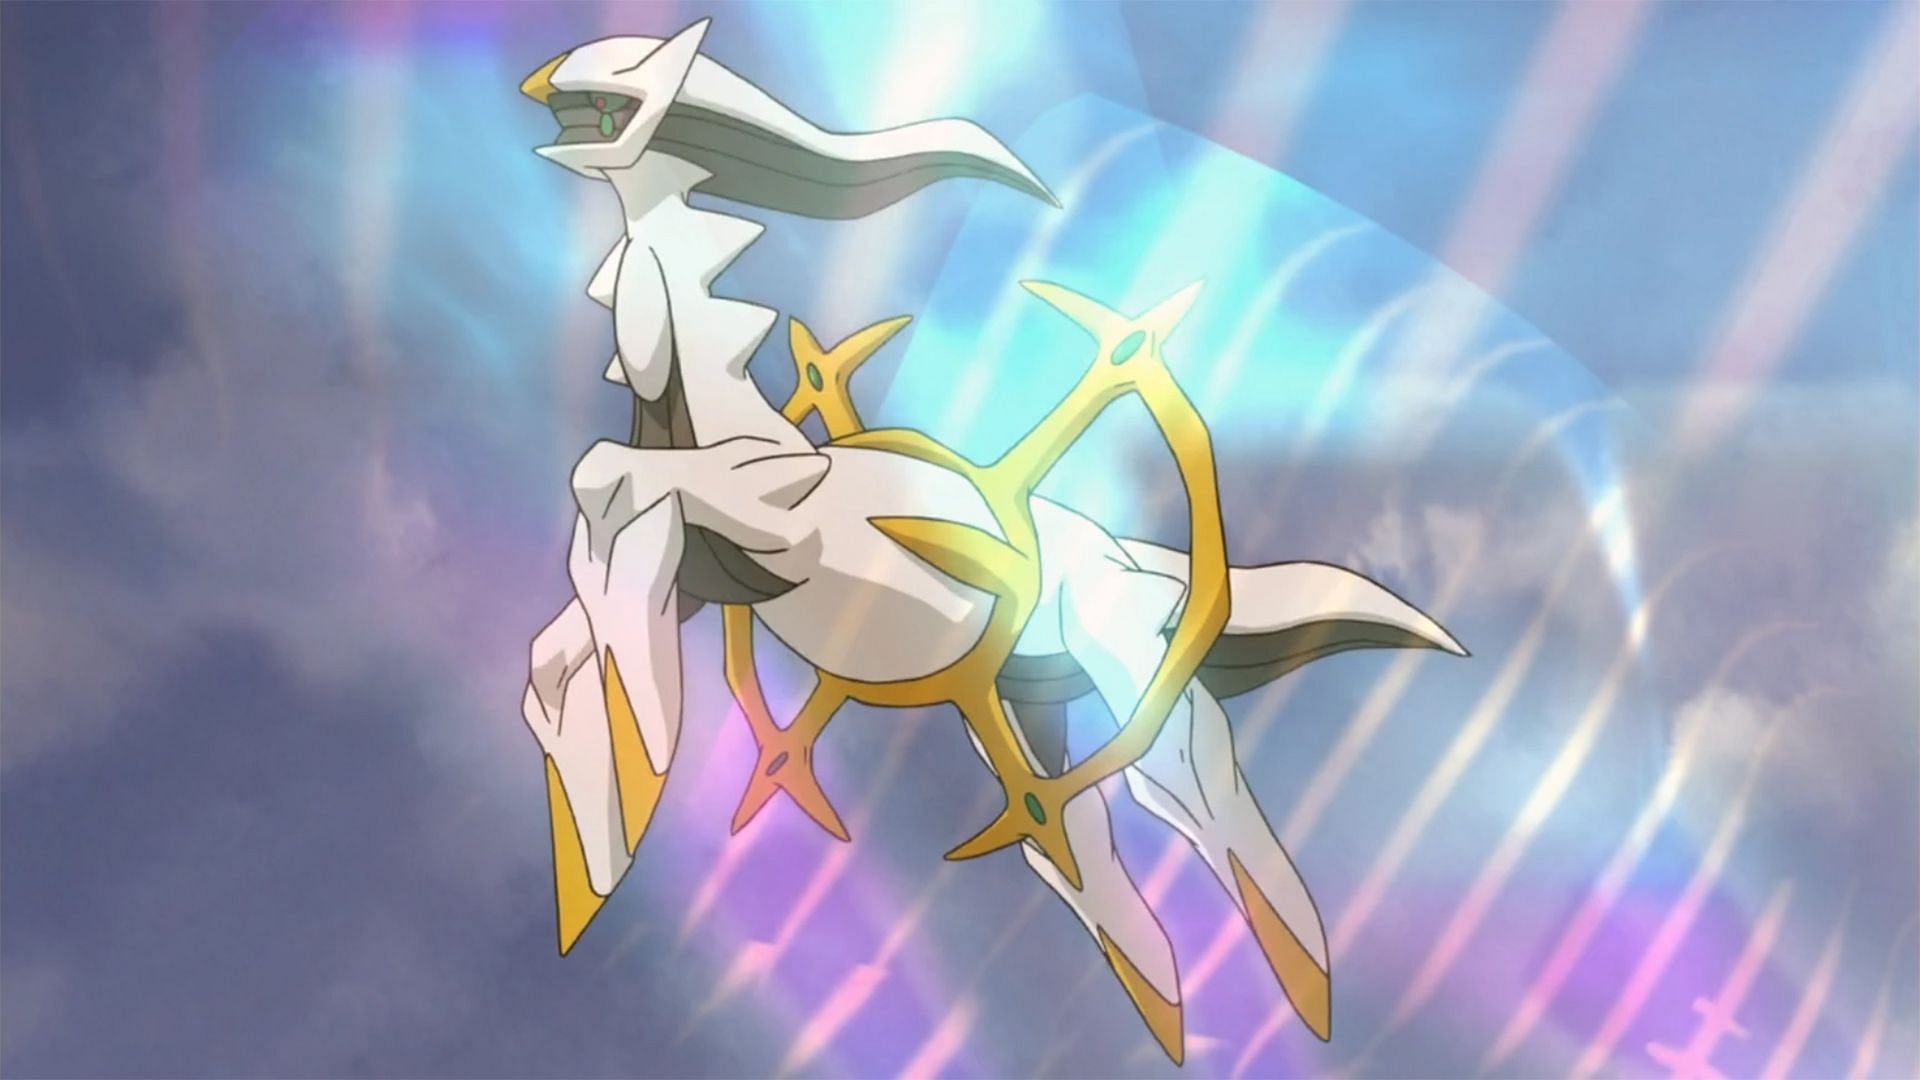 Arceus as it appears in the anime (Image via Niantic)